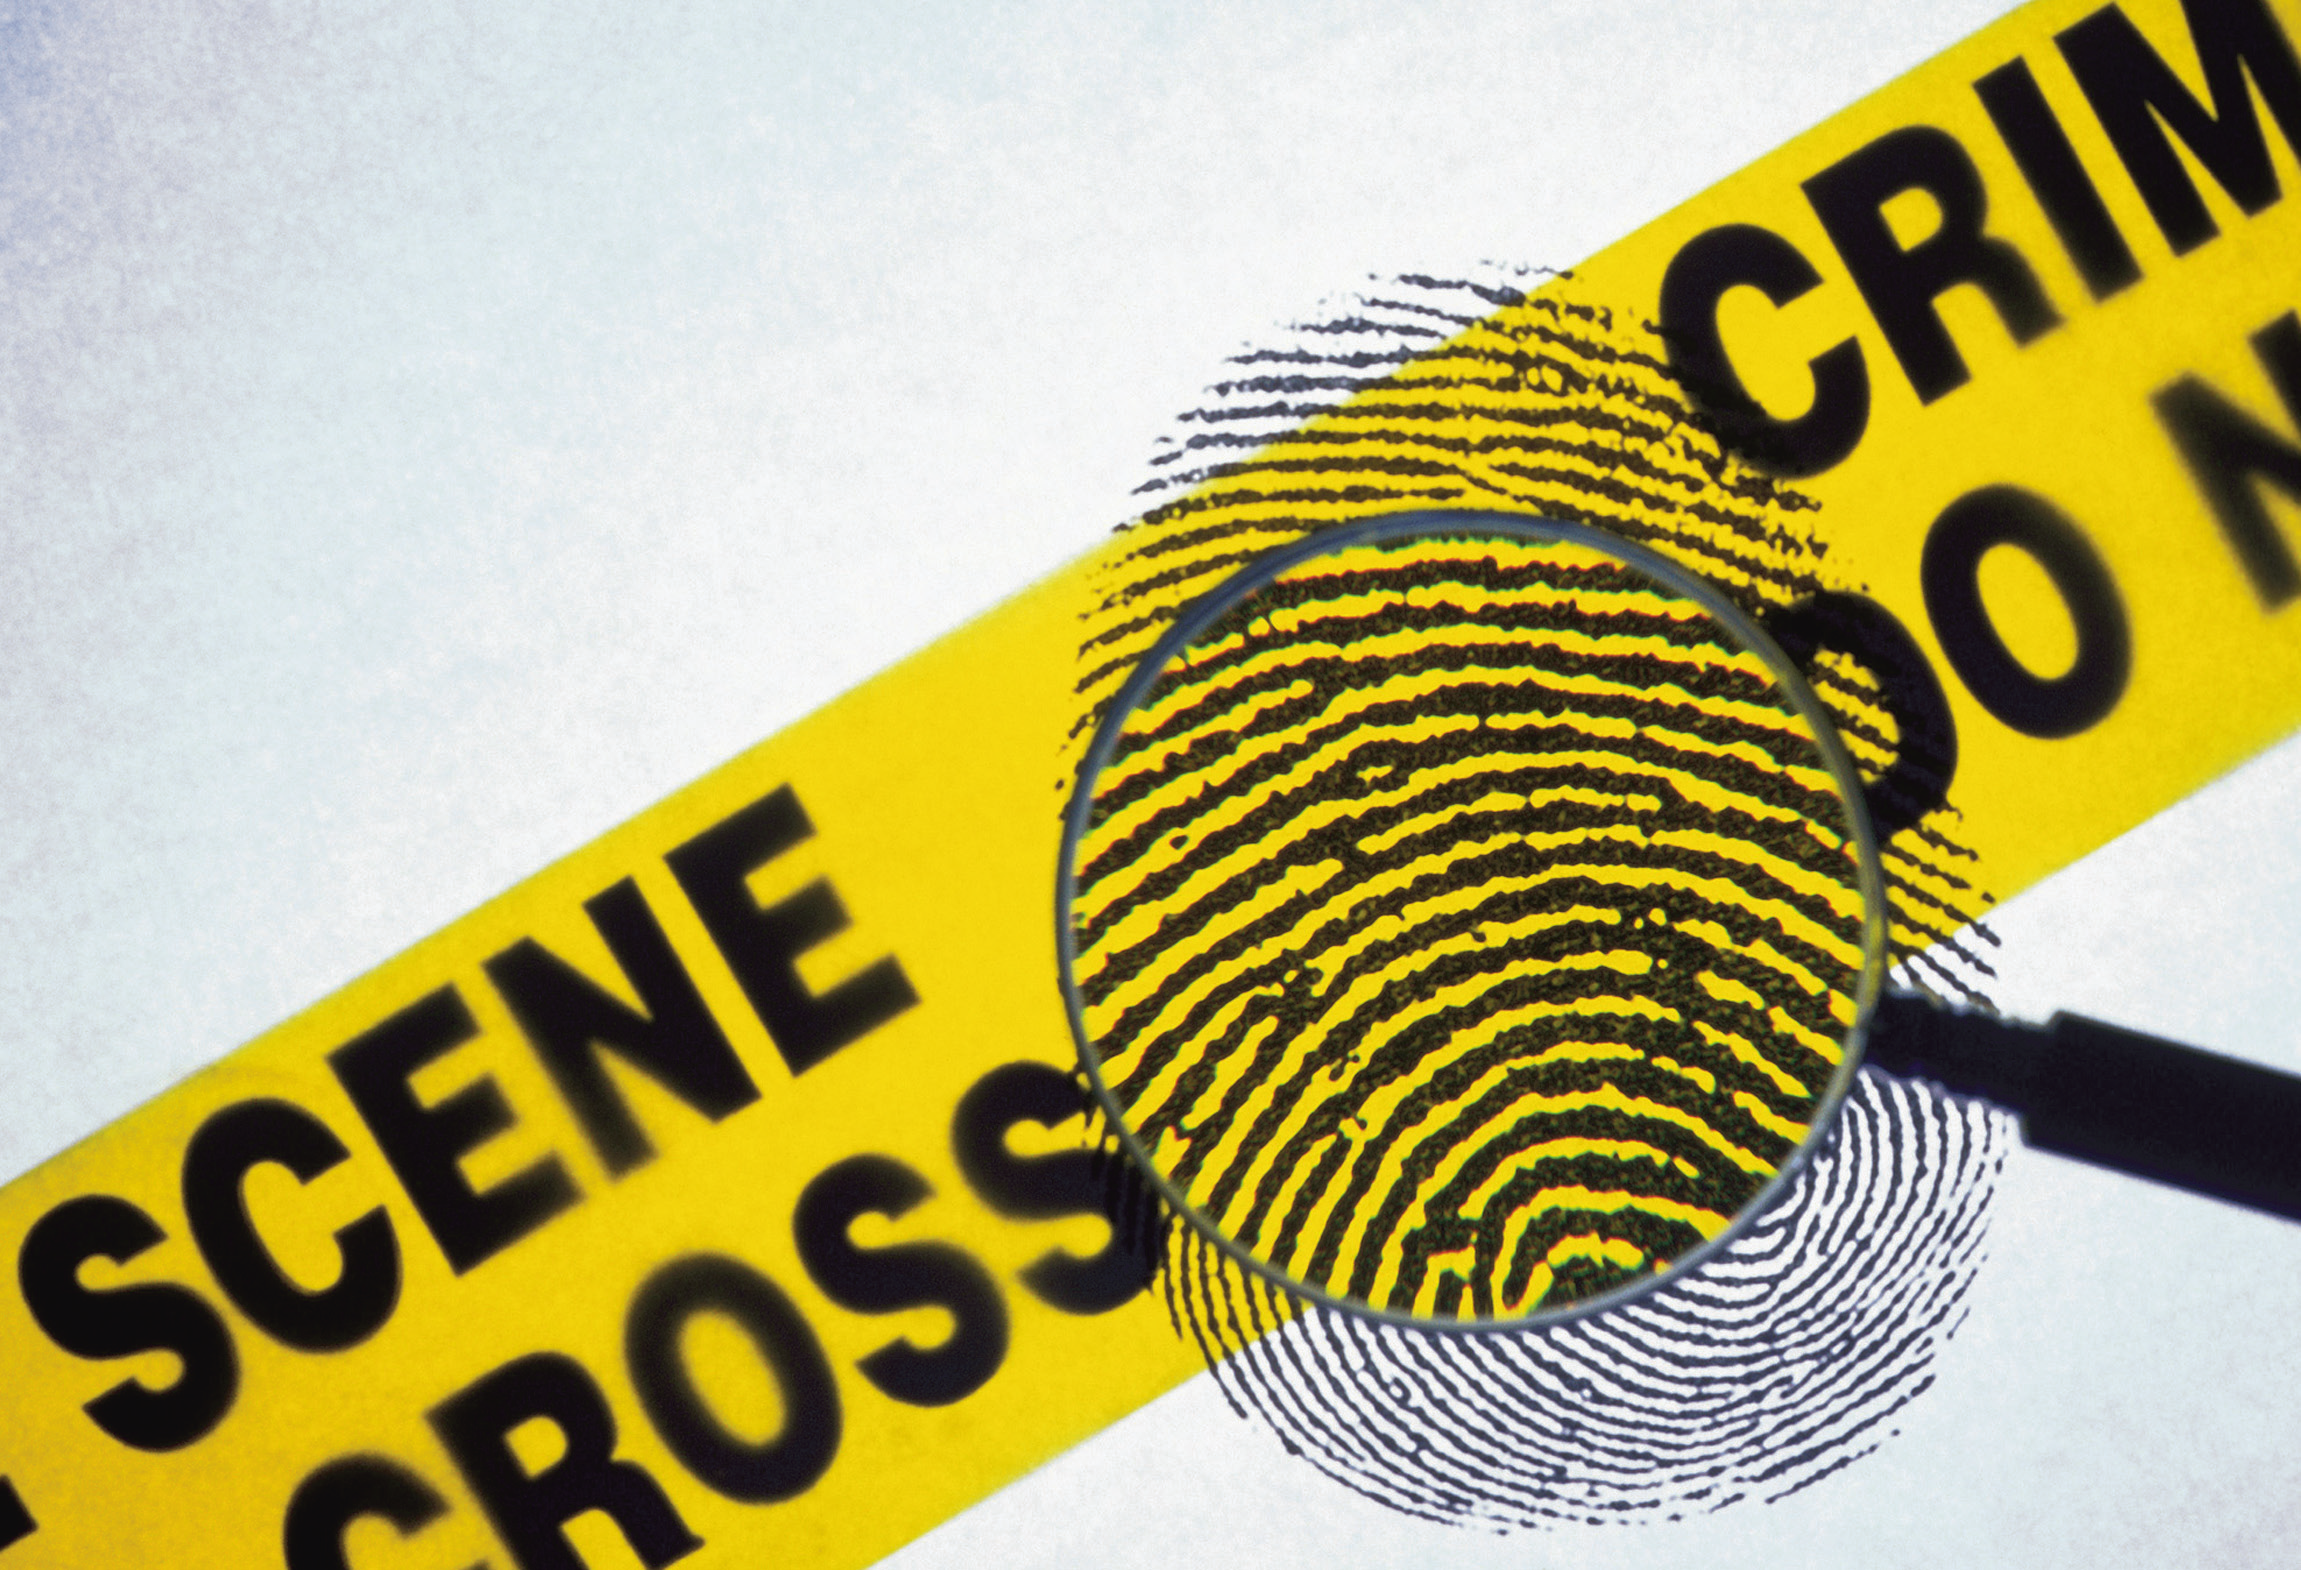 Forensic Science Conference